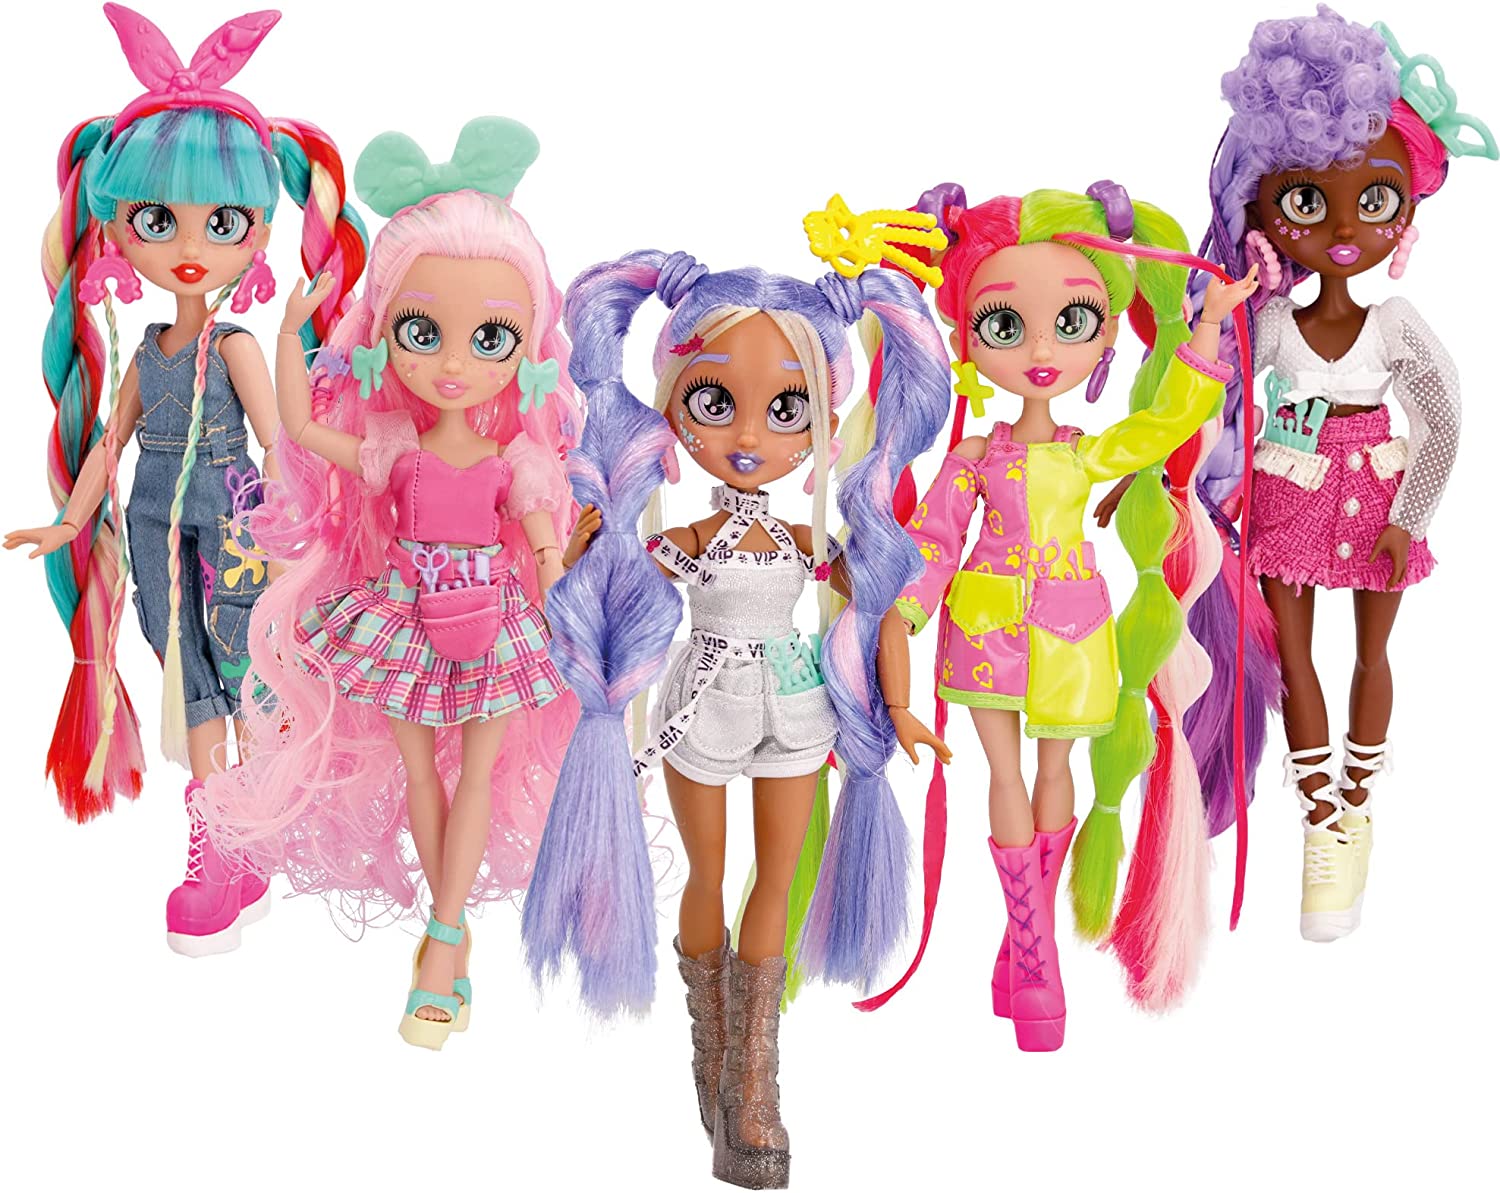 VIP Girls dolls from creators of VIP Pets - YouLoveIt.com